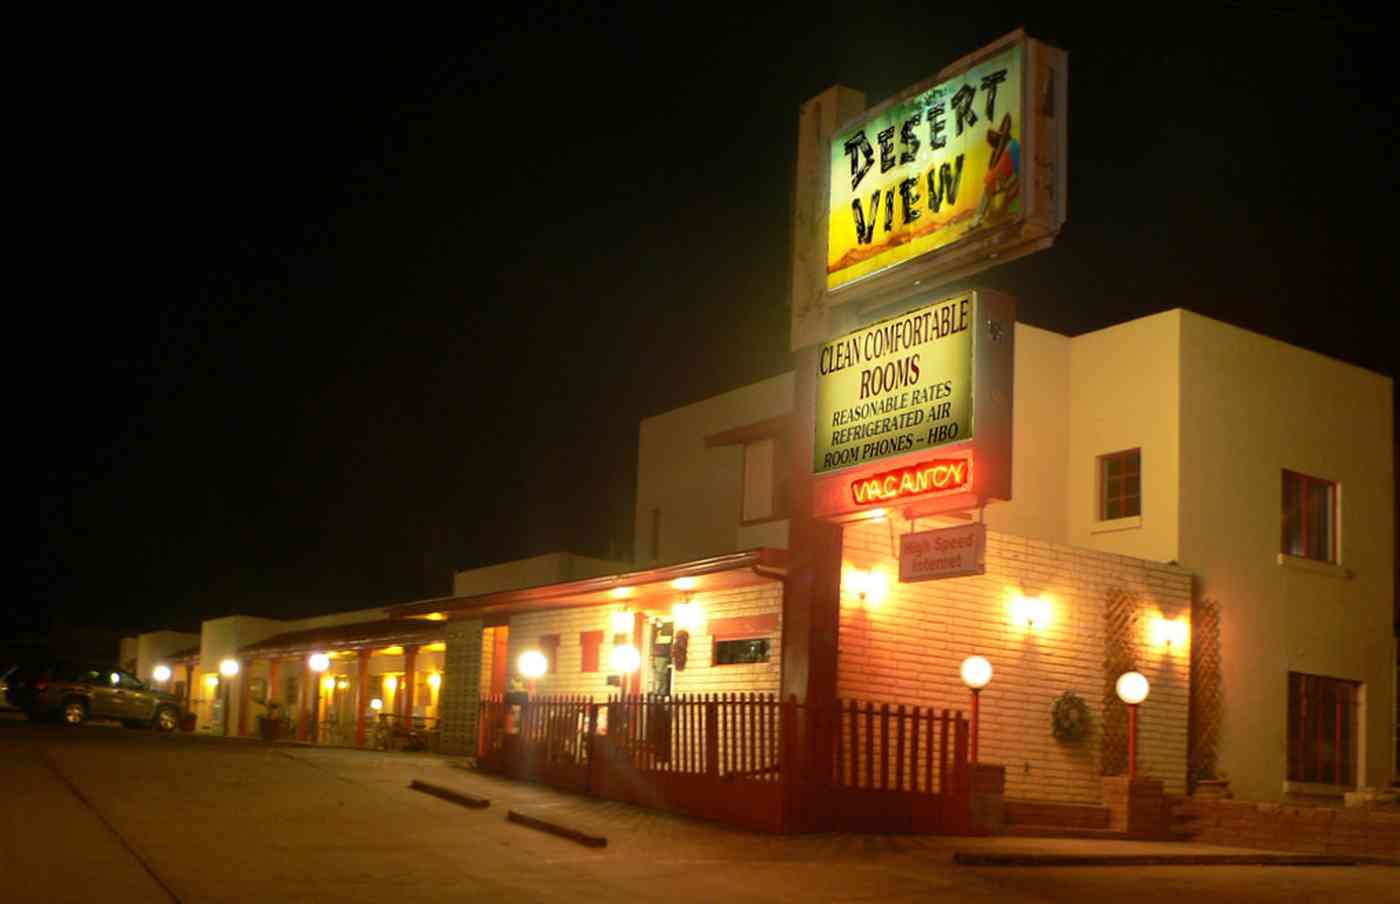 Desert View Inn, Truth or Consequences, at night